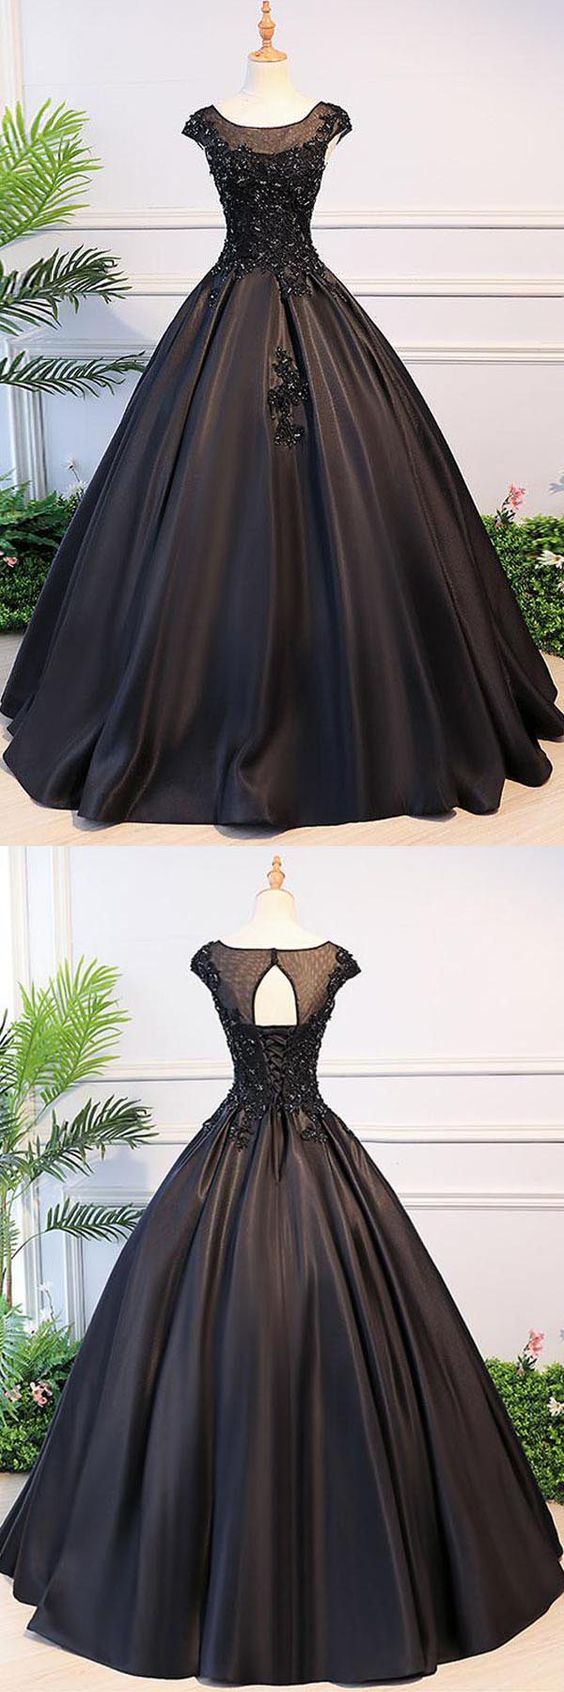 Black Ball Gown Illusion Neck Cap Sleeves Prom Dress,graduation Ball Gown